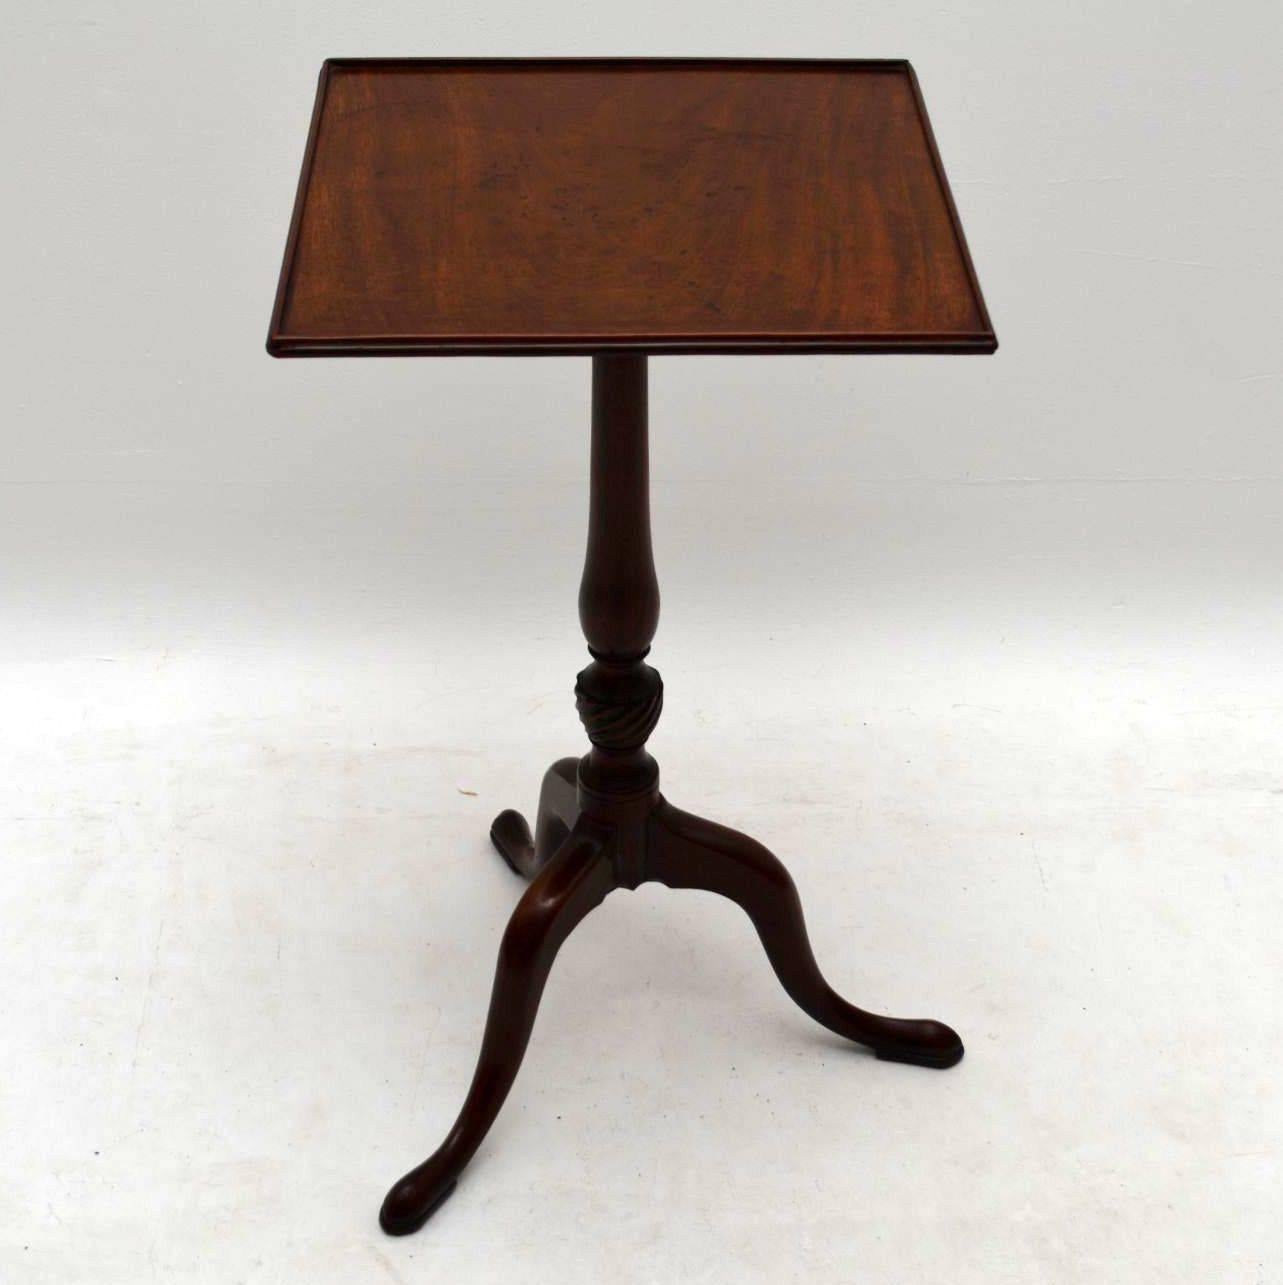 Original antique mahogany George III tripod table in good original condition and with a lovely color. It has a square top sitting on a spiral turned baluster stem with tripod legs. I believe this table dates to around the 1760-1780s period & it’s